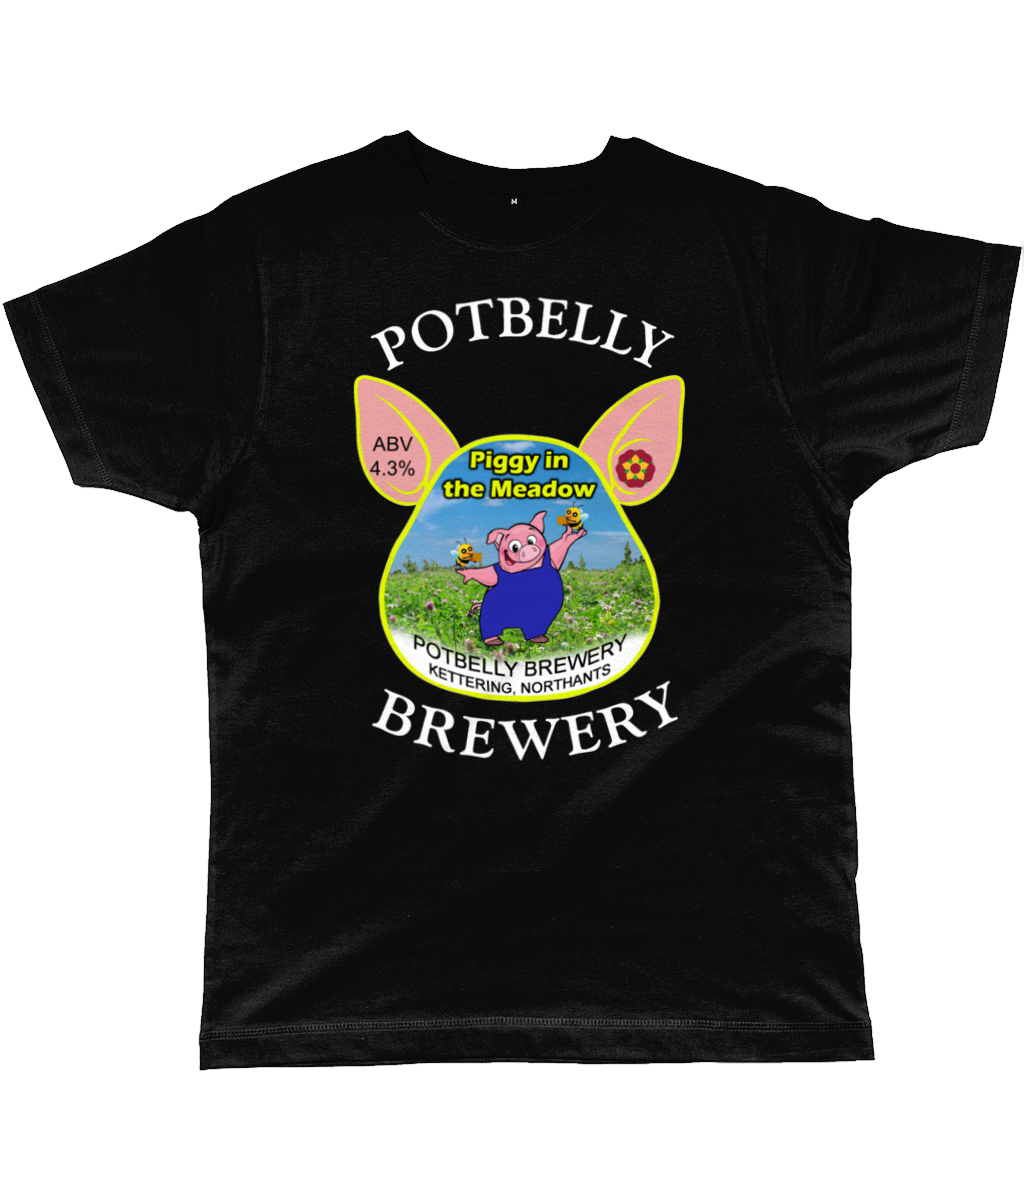 Men's T-Shirt Potbelly Brewery Piggy in the Meadow Classic Cut T-Shirt